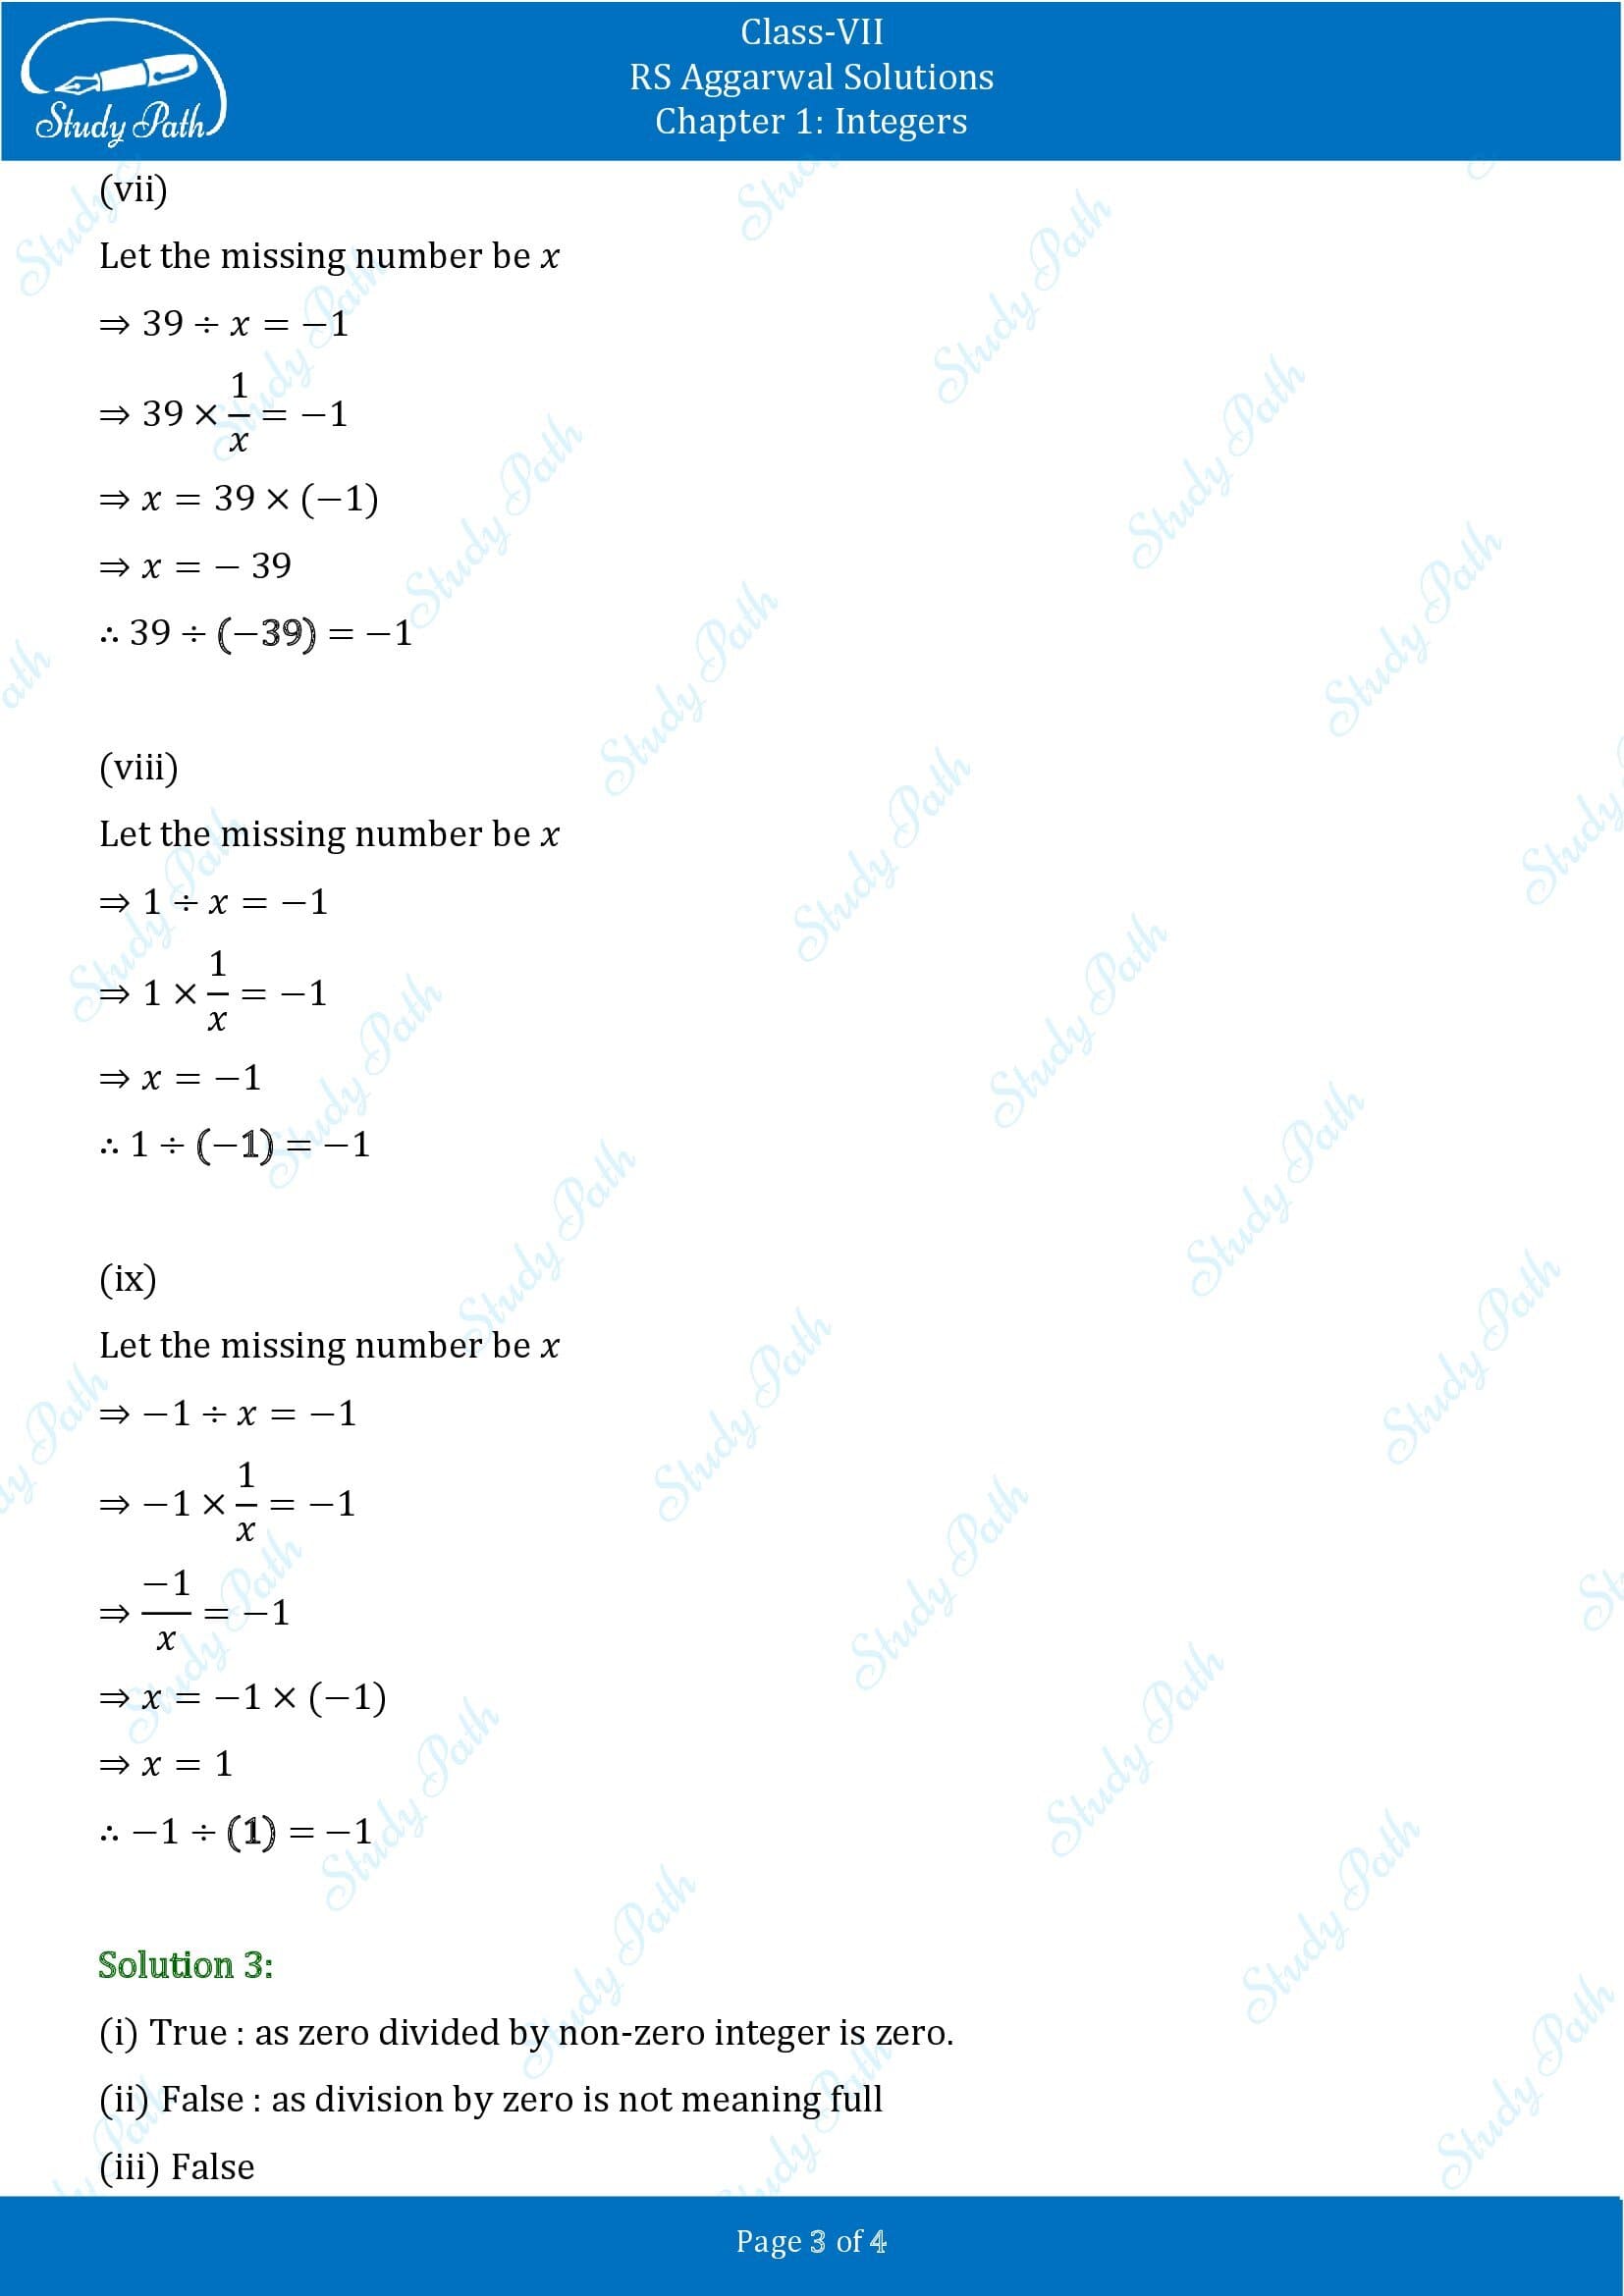 RS Aggarwal Solutions Class 7 Chapter 1 Integers Exercise 1C 003